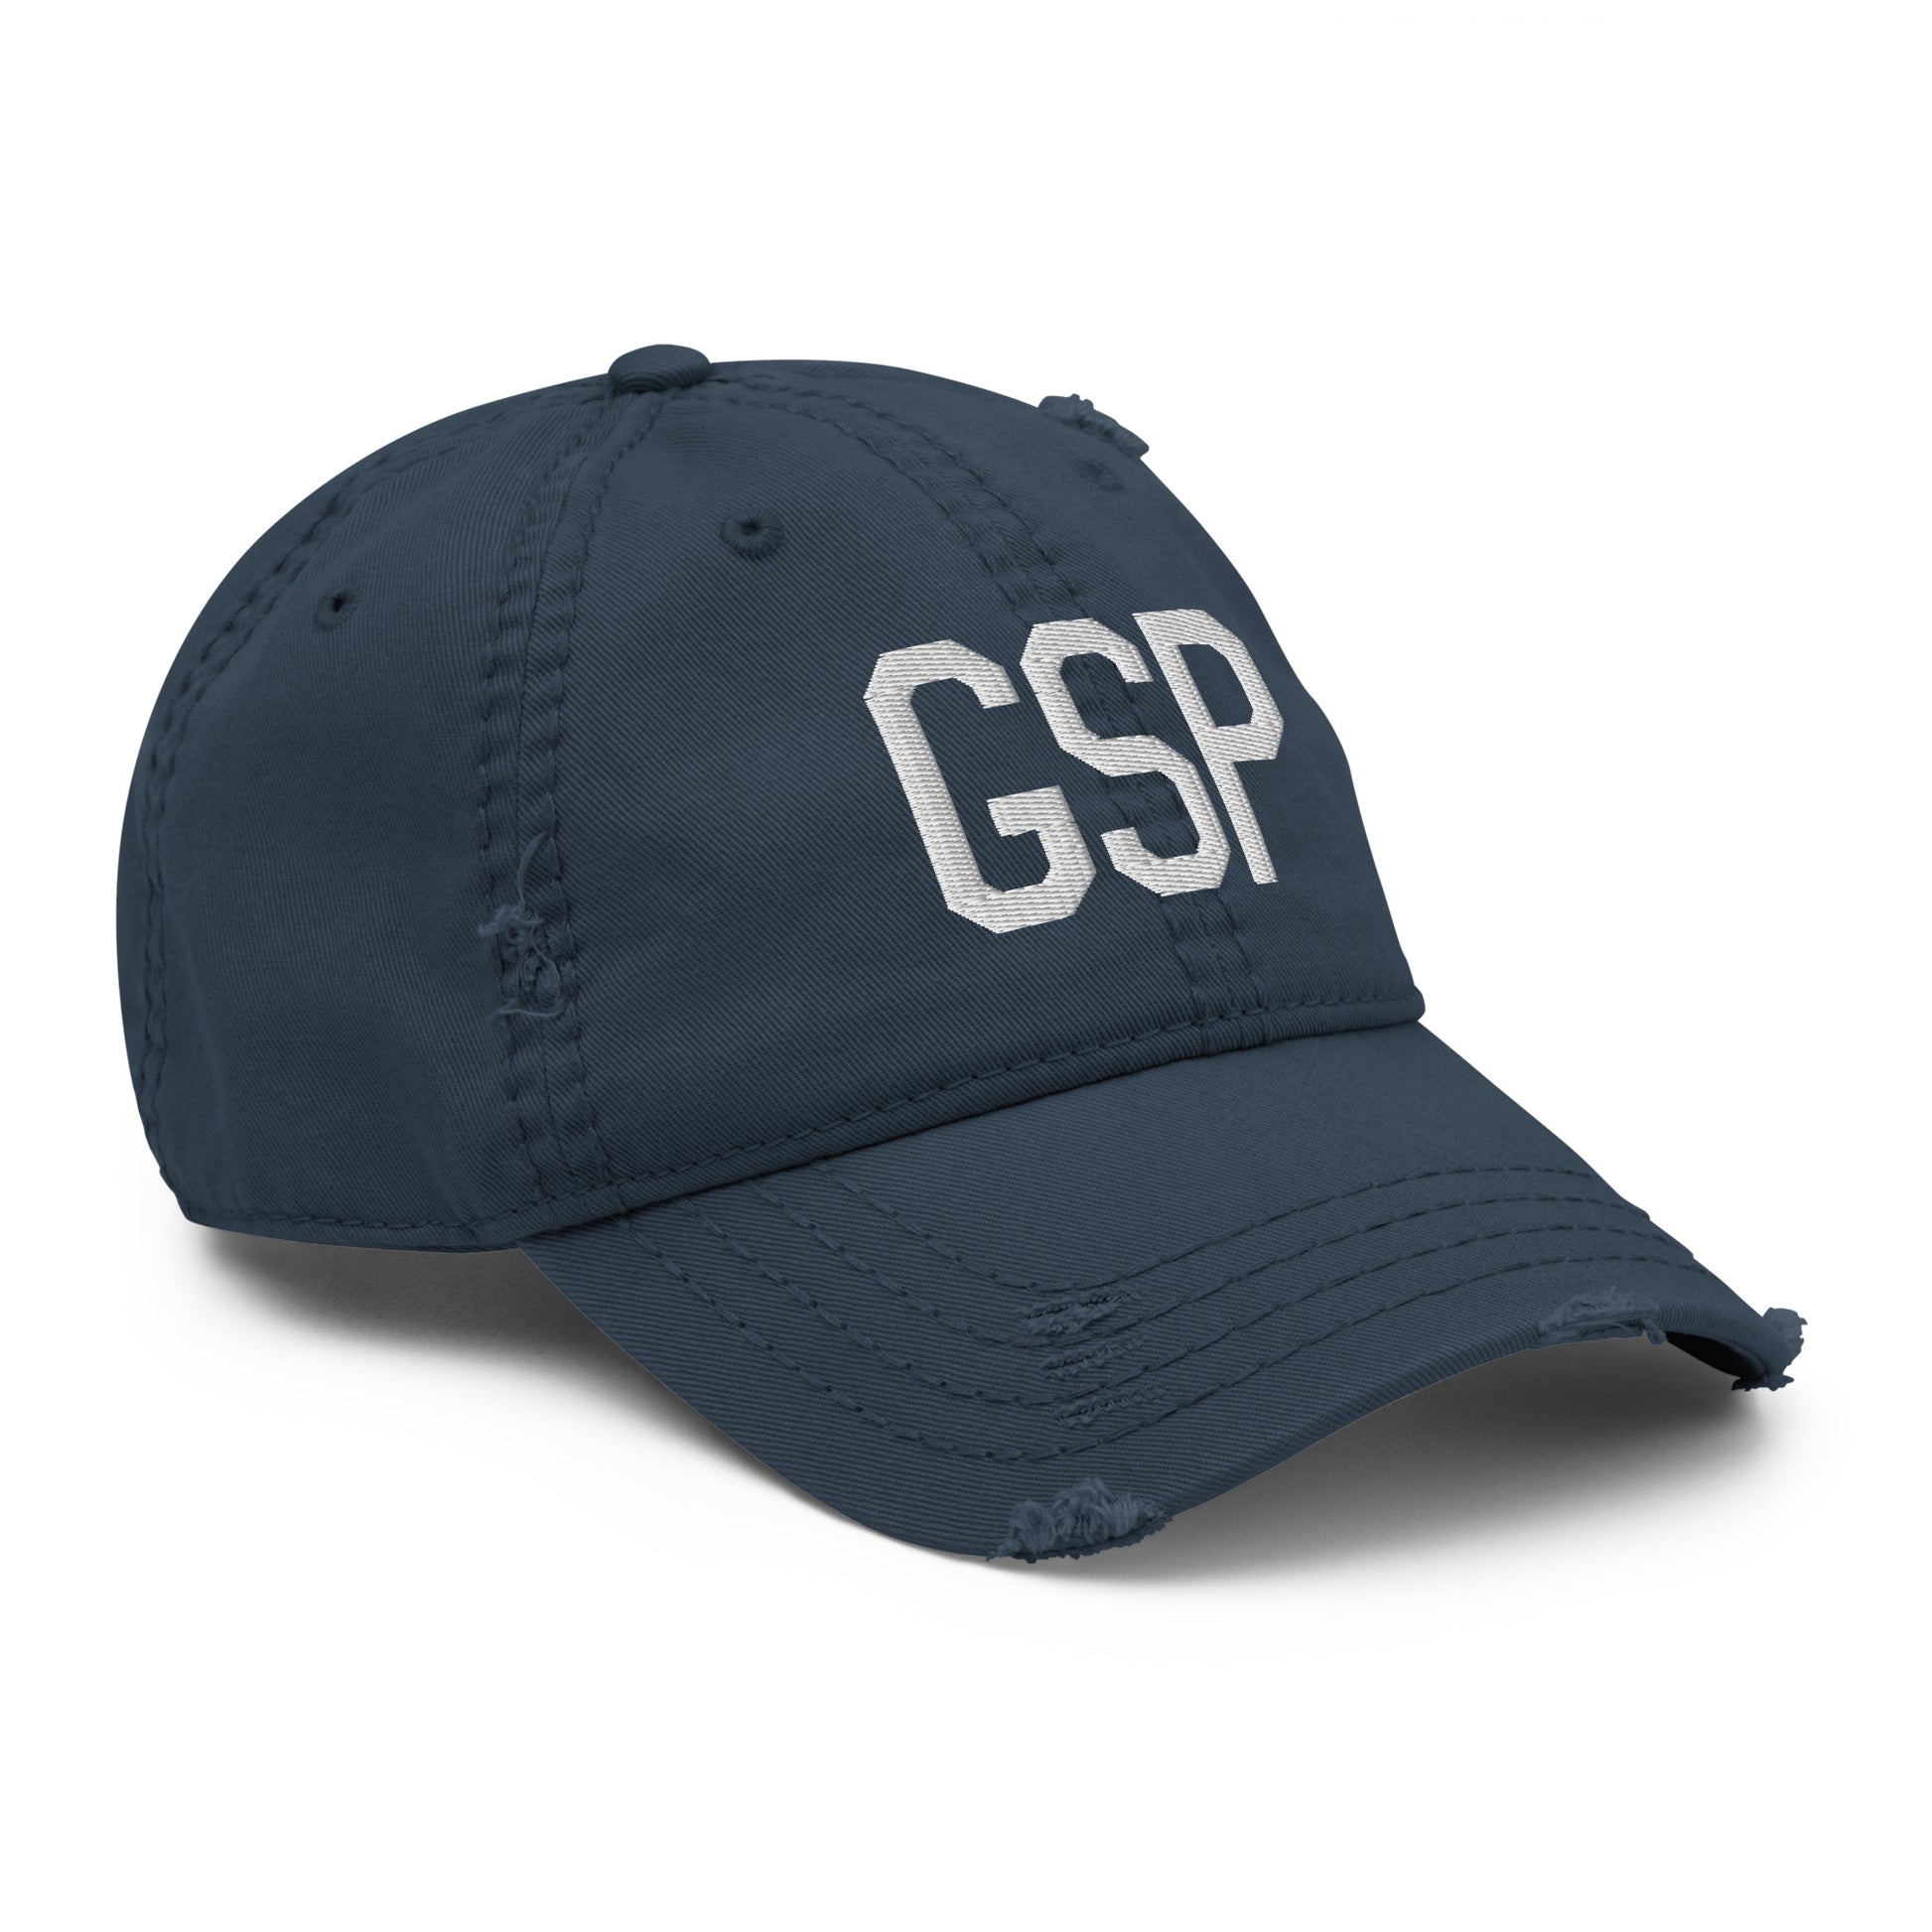 Airport Code Distressed Hat - White • GSP Greenville-Spartanburg • YHM Designs - Image 14